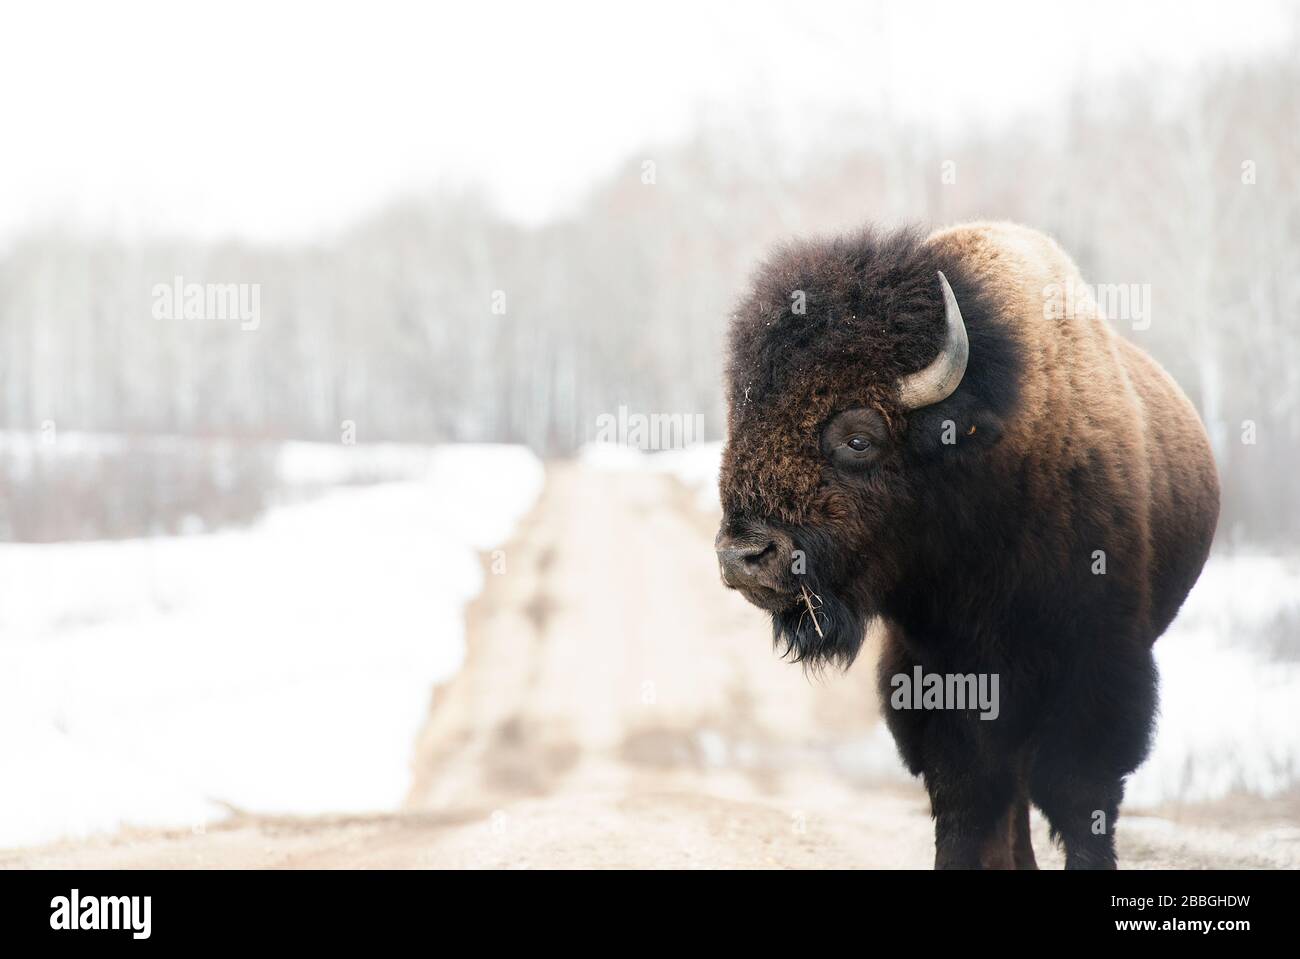 Bison on road in winter in Manitoba Canada Stock Photo